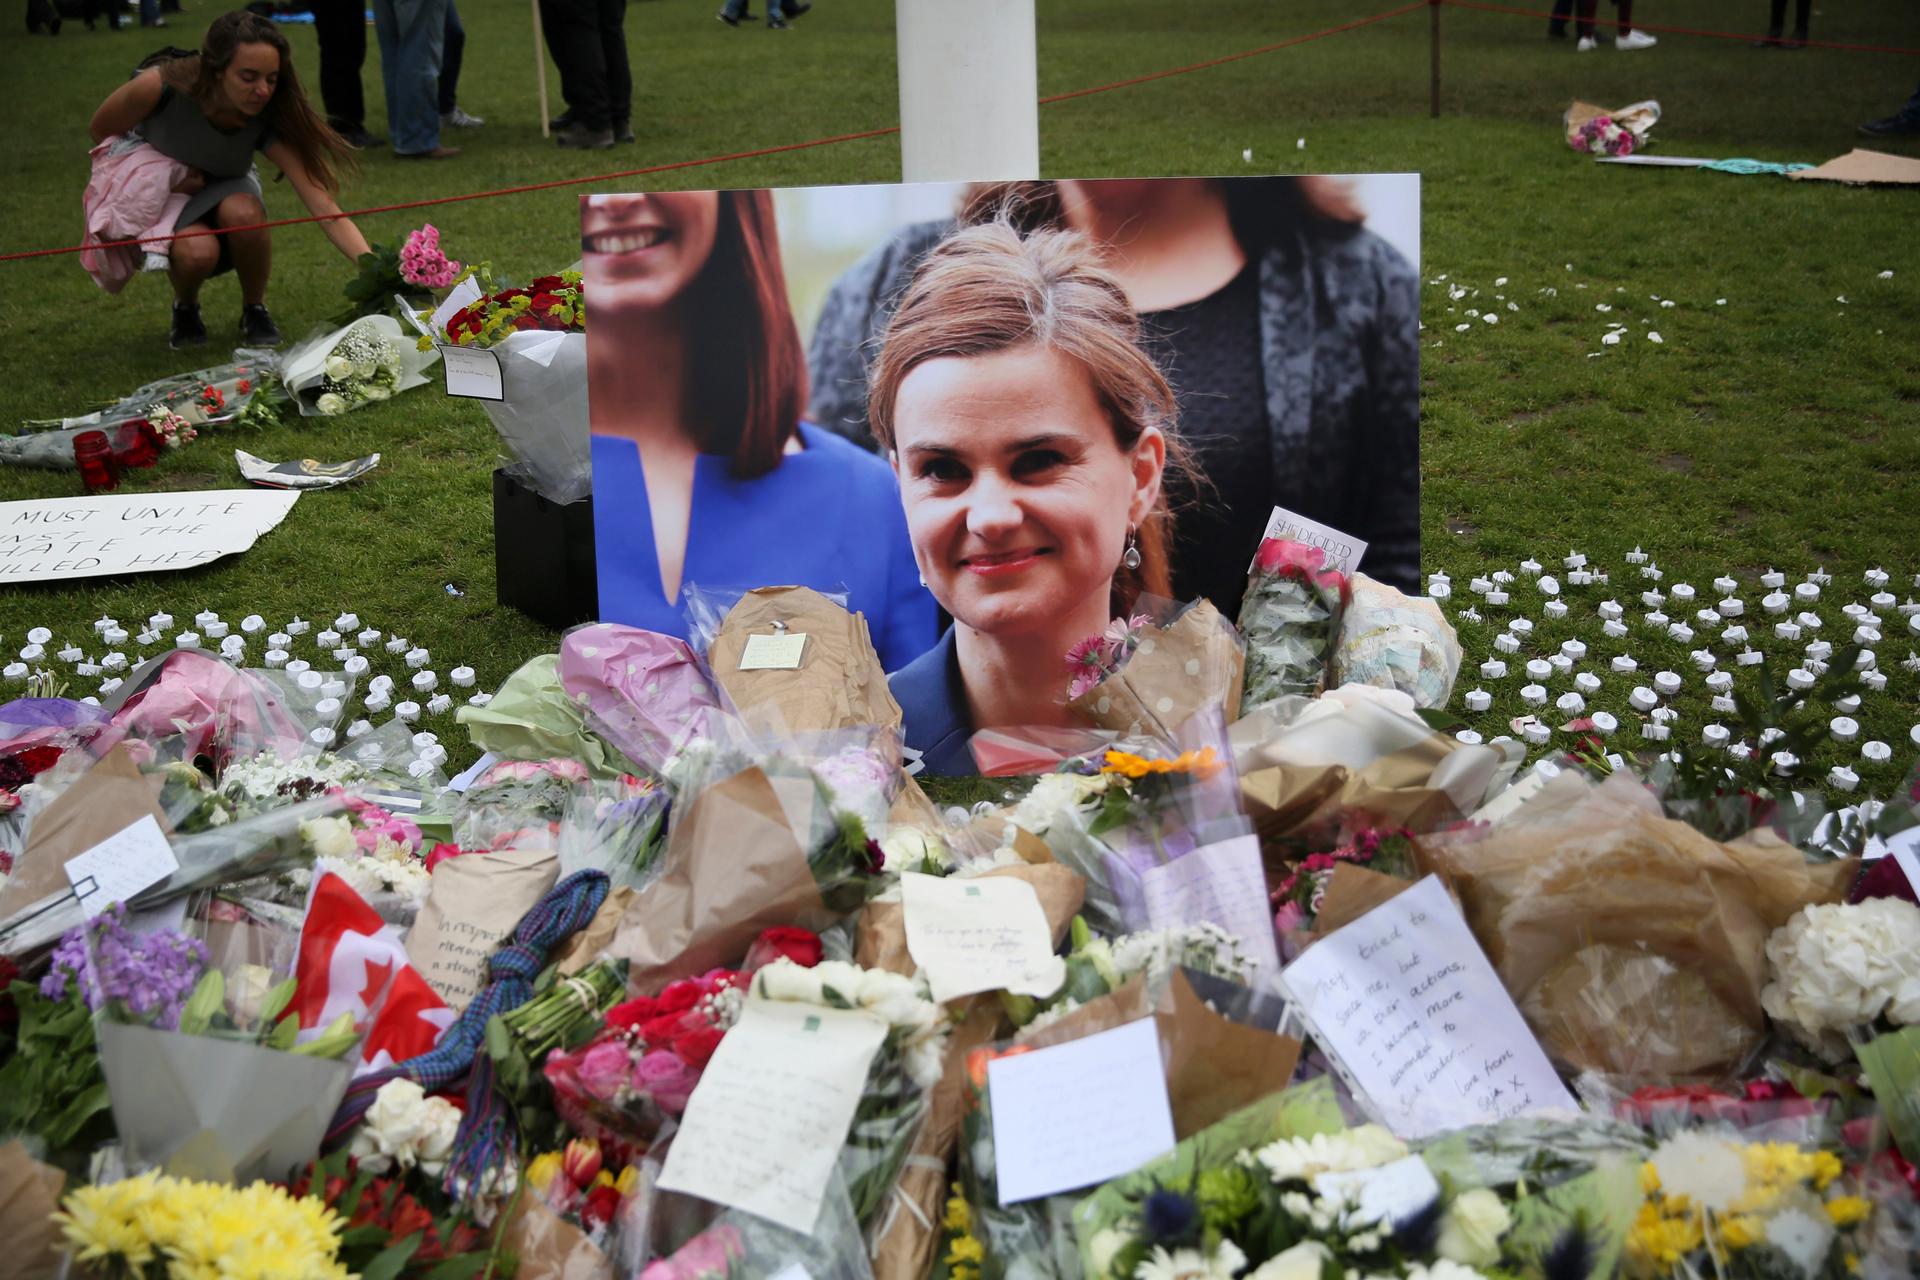 Tributes in memory of murdered Labour Party MP Jo Cox, who was shot dead in Birstall, are left at Parliament Square in London,